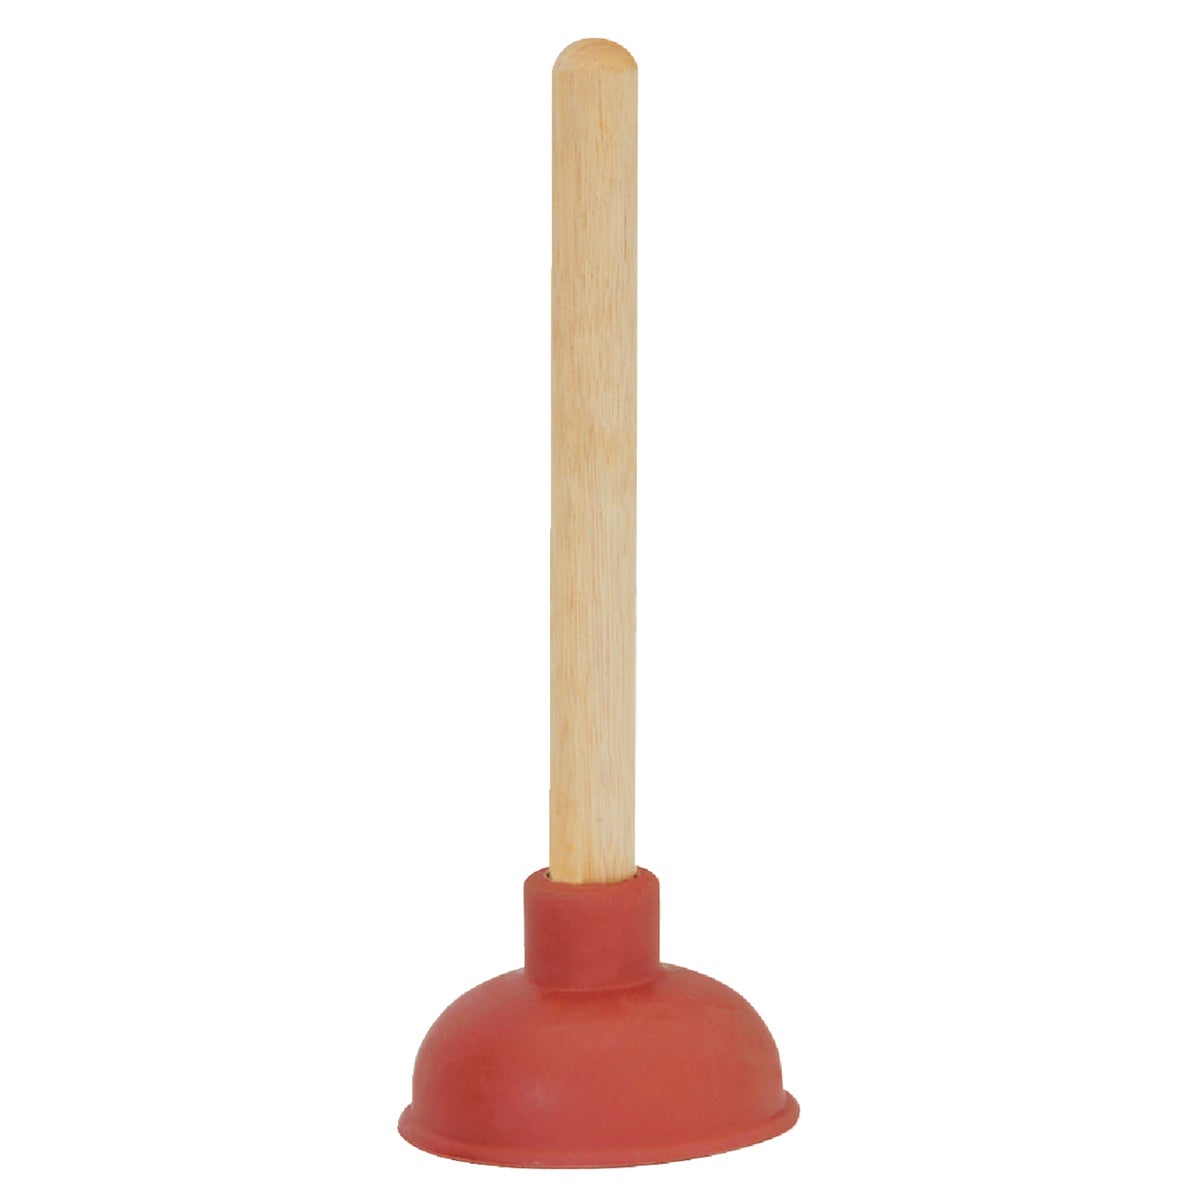 4″ RED PLUNGER